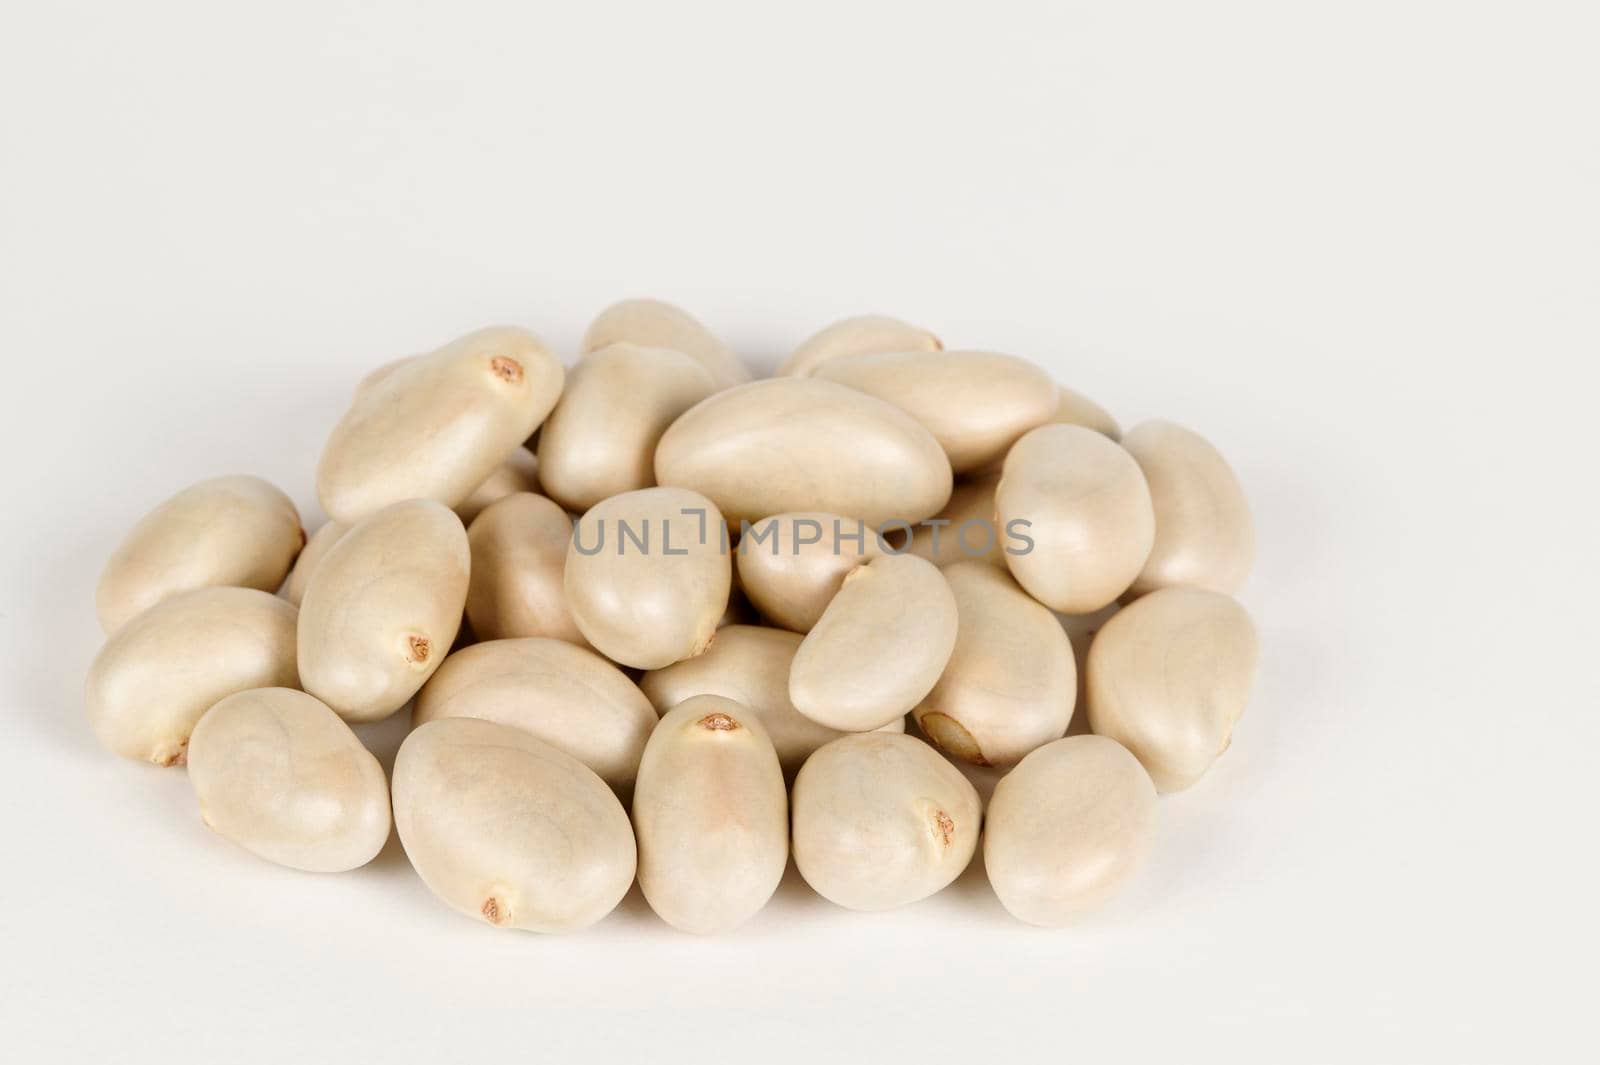 Pile of Jackfruit seeds on a white background